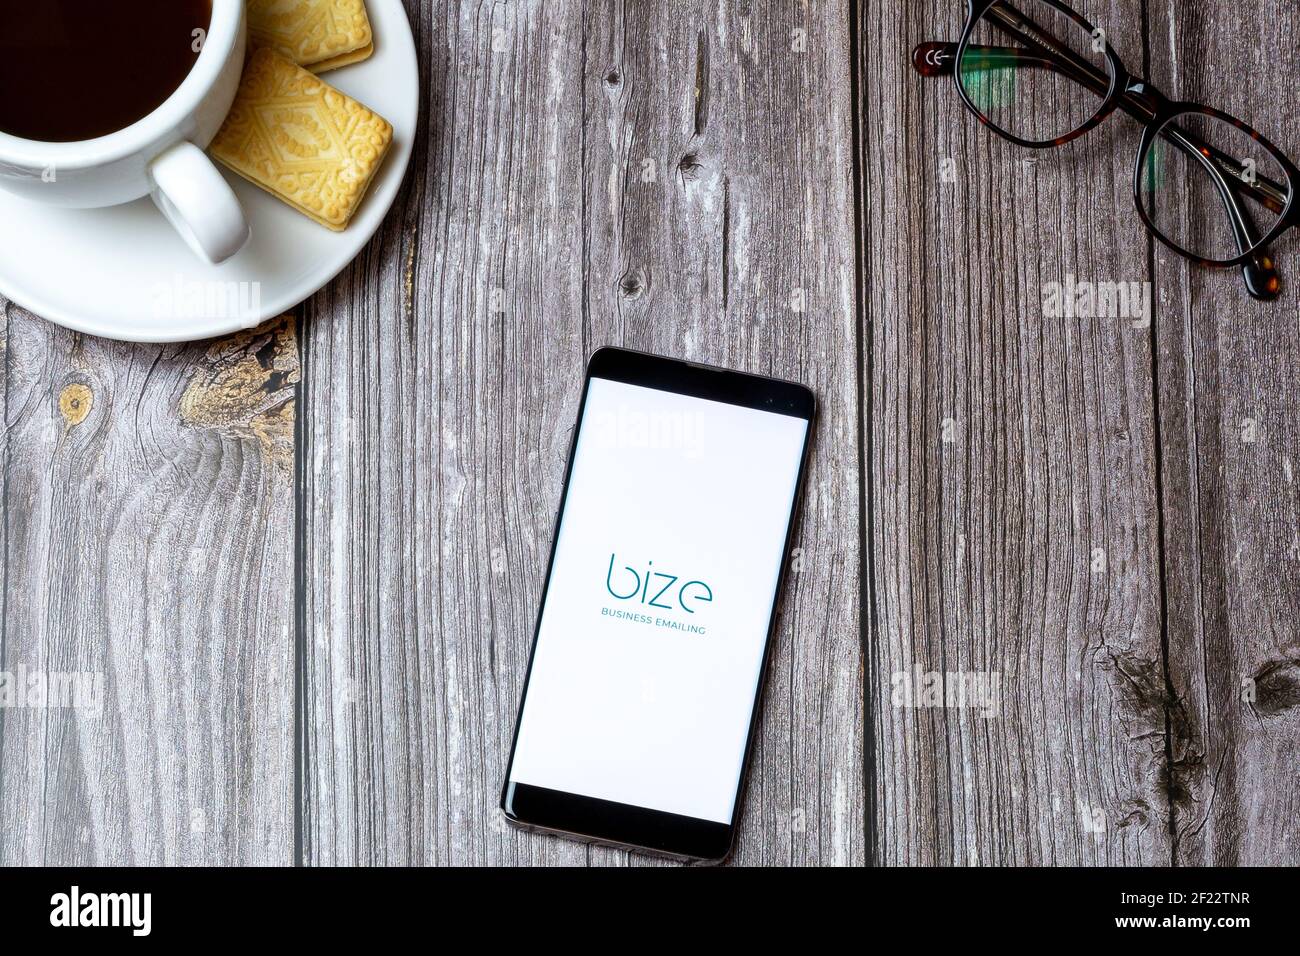 A mobile phone or cell phone on a wooden table with the Bize Business Emailing app open next to a coffee Stock Photo